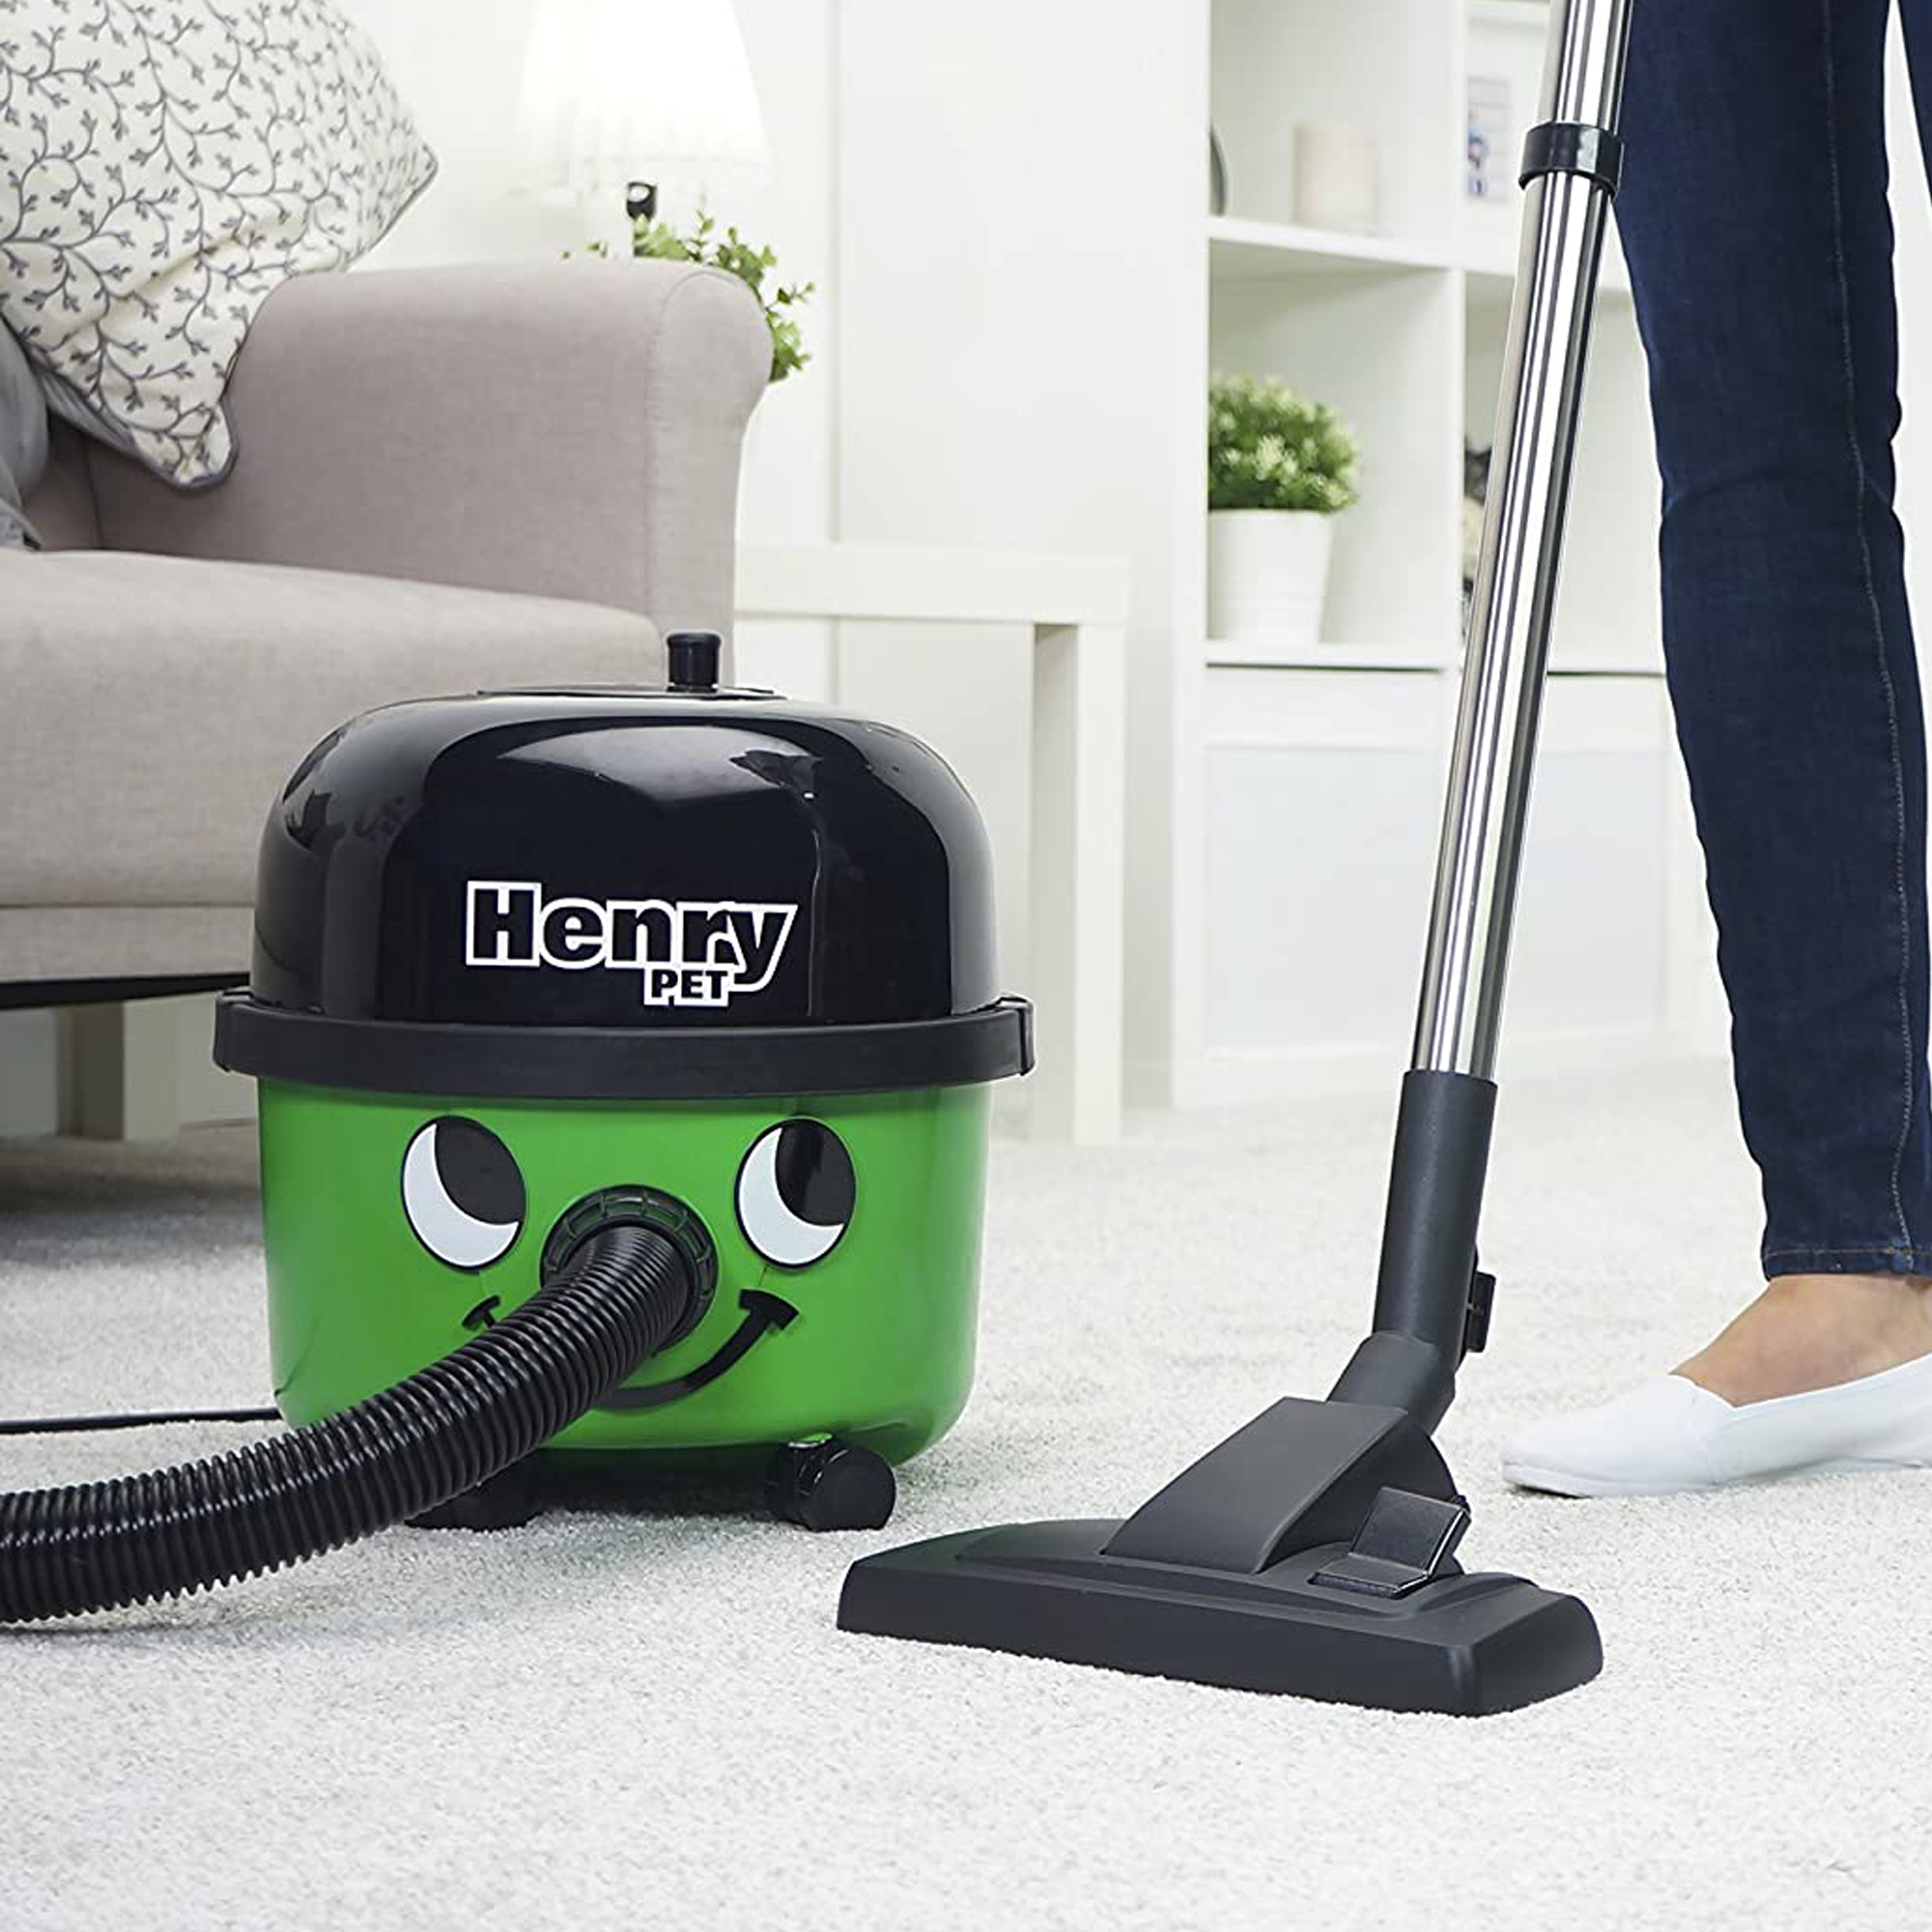 Best Henry Hoover Vacuum Cleaner Comparison & Reviews 2021